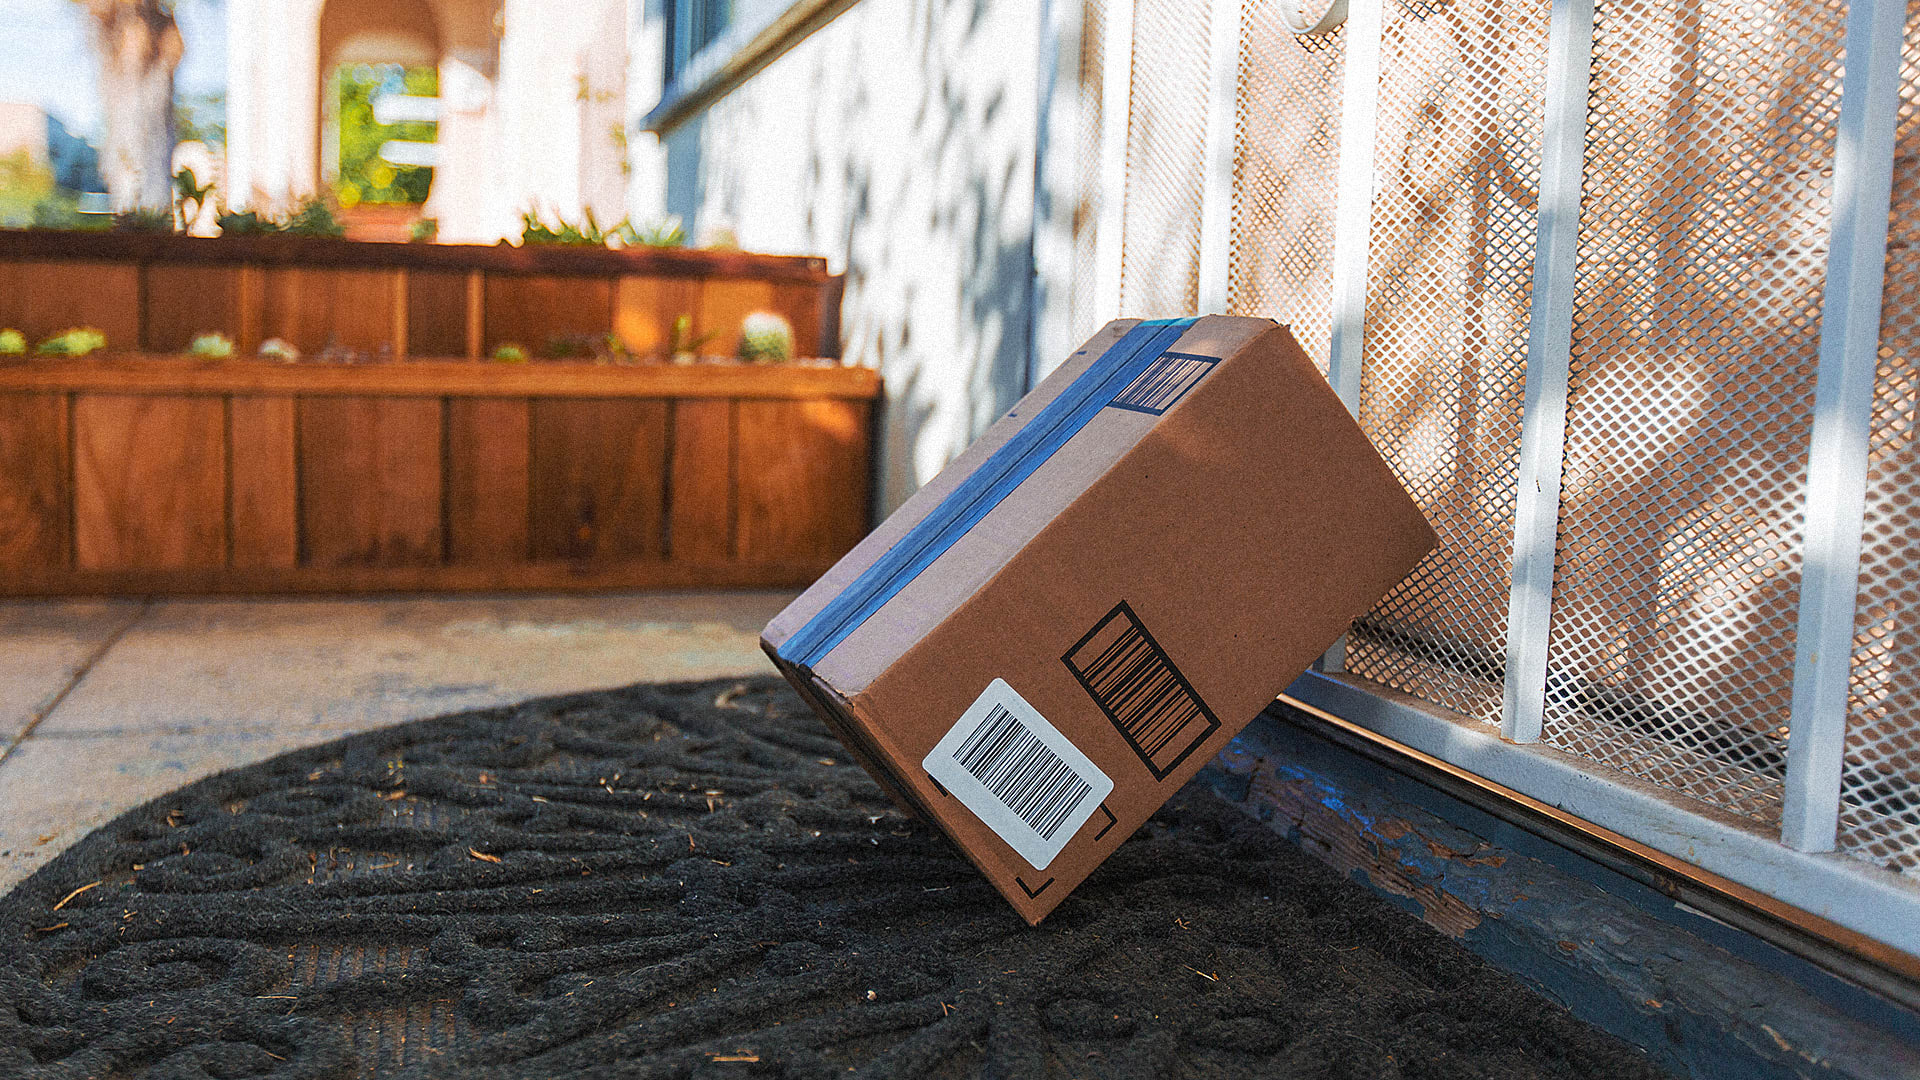 Porch piracy has ruined online shopping, but there’s a simple fix